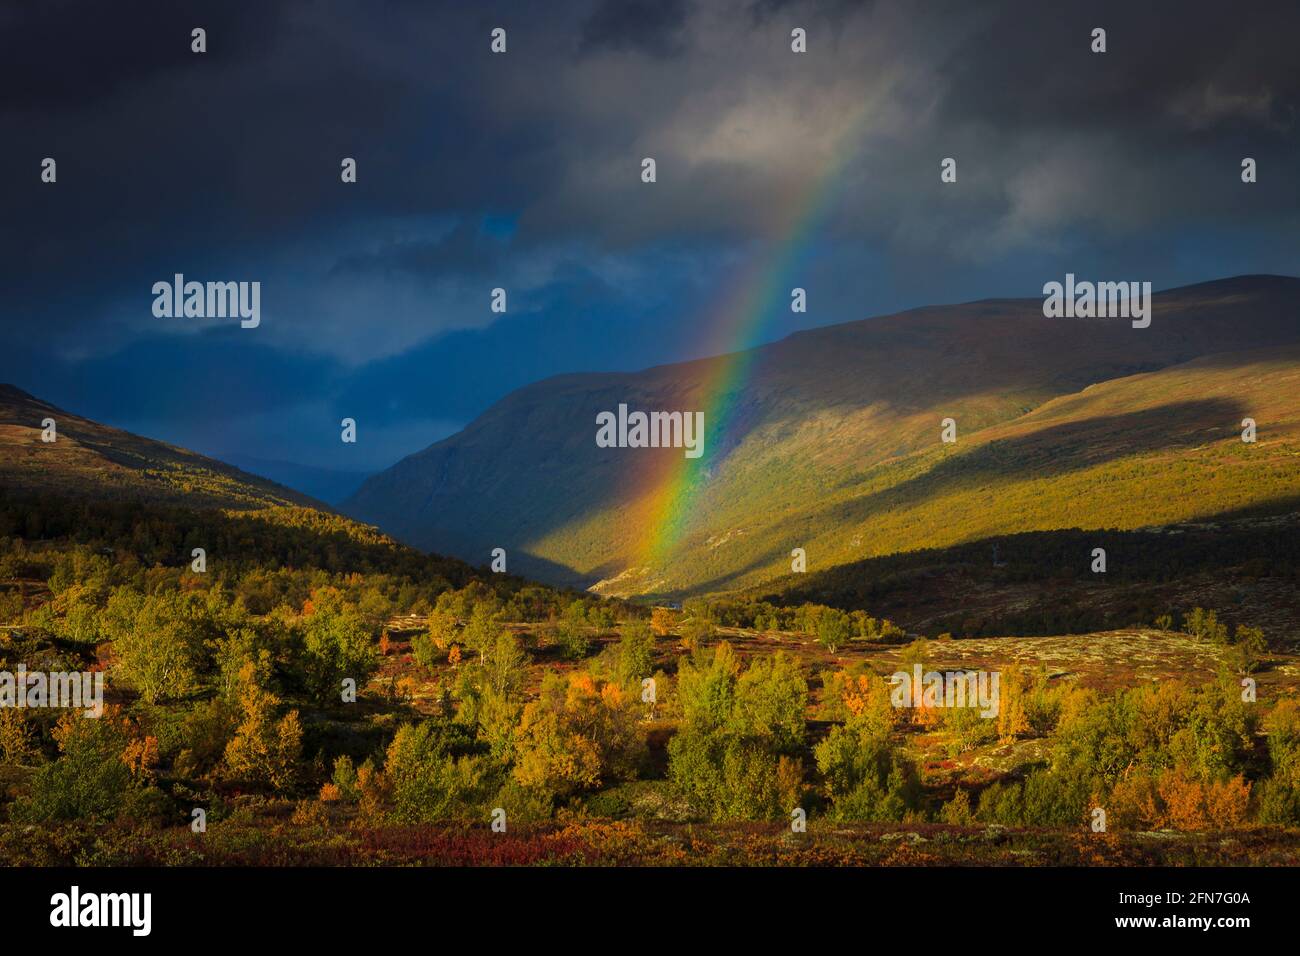 Golden hour evening light, autumn colors, rainbow, and dark dramatic skies in Dovrefjell national park, Dovre, Norway, Scandinavia. Stock Photo